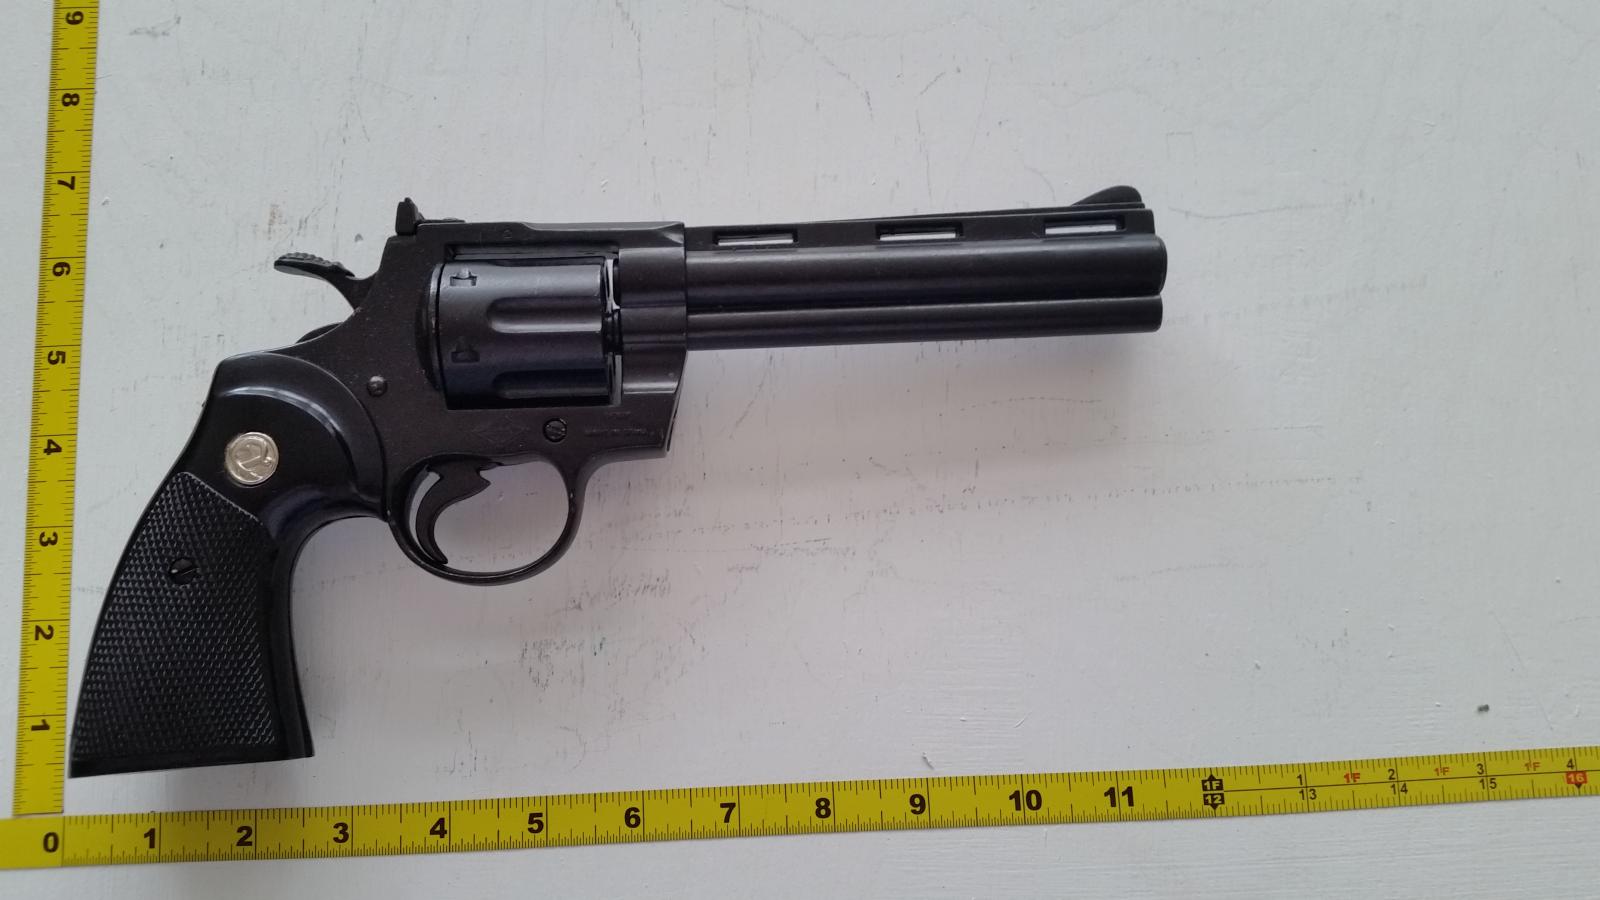 .357 6" Magnum Police Model Non-Firing Replica. Swing out 6 shot cylinder & working double action. Length: 11" Weight: 2.3 lbs